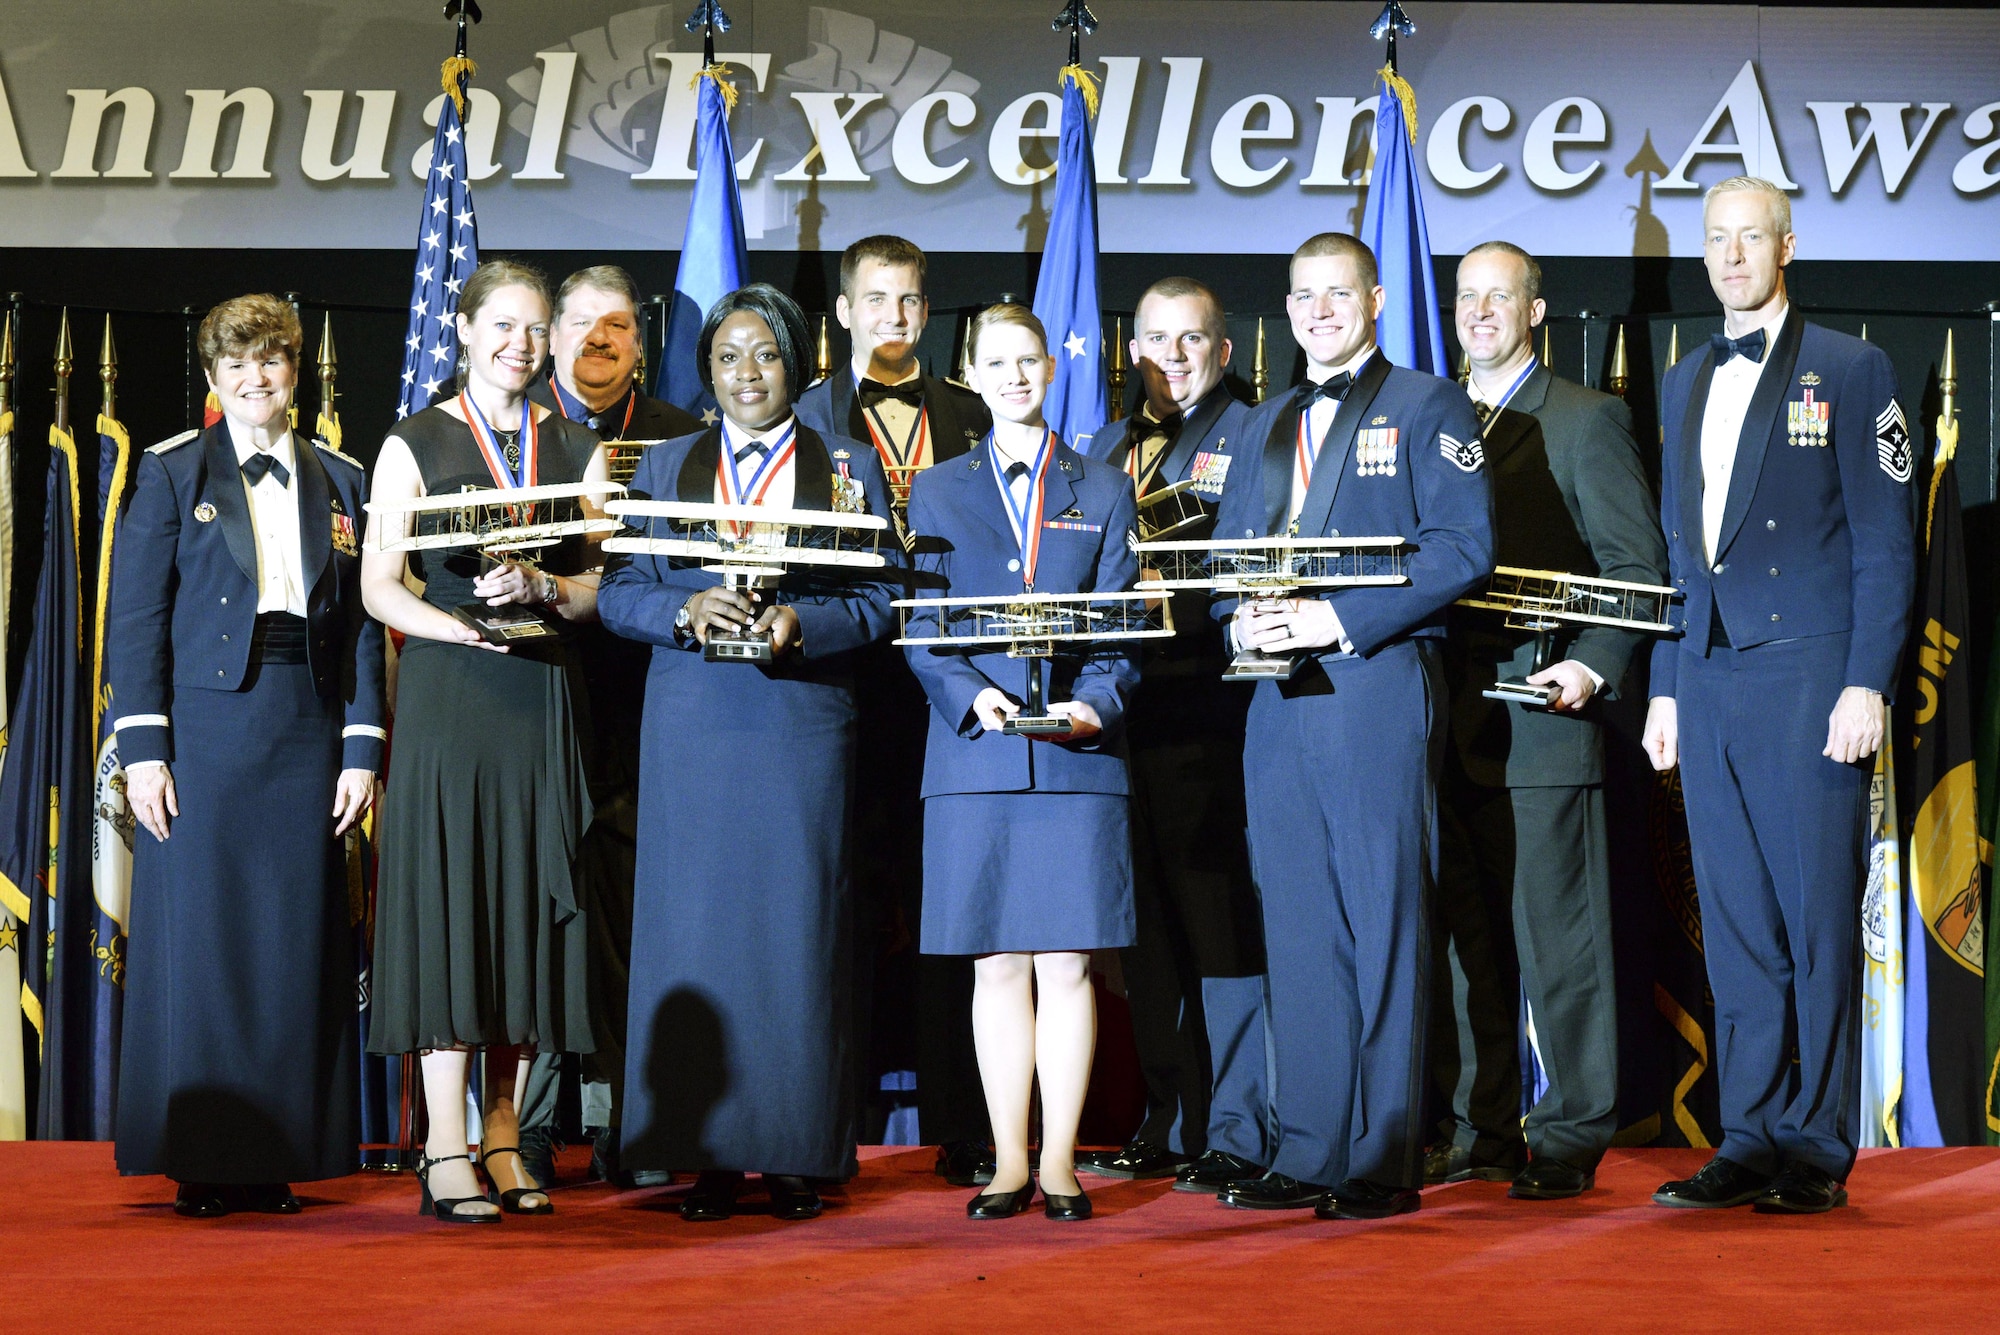 Air Force Materiel Command's Annual Excellence Award winners for 2014 stand on stage at the ceremony. From left: Gen. Janet Wolfenbarger, AFMC commander; Laura Letterman, Hollomon Air Force Base, New Mexico; Theron Jones, Robins AFB, Georgia; Master Sgt. Freda Dey, Eglin AFB, Florida; Capt. Benjamin Carlson, Tyndall AFB, Florida; Senior Airman Natalie Norlock, Joint Base San Antonio, Texas; Master Sgt. Raymond Hillis, Wright-Patterson AFB, Ohio; Staff Sgt. Kurtis Harrison, Eglin AFB; Travis Adams, Hill AFB, Utah; and Chief Master Sgt. Michael Warner, AFMC command chief. (U.S. Air Force photo/Wesley Farnsworth)